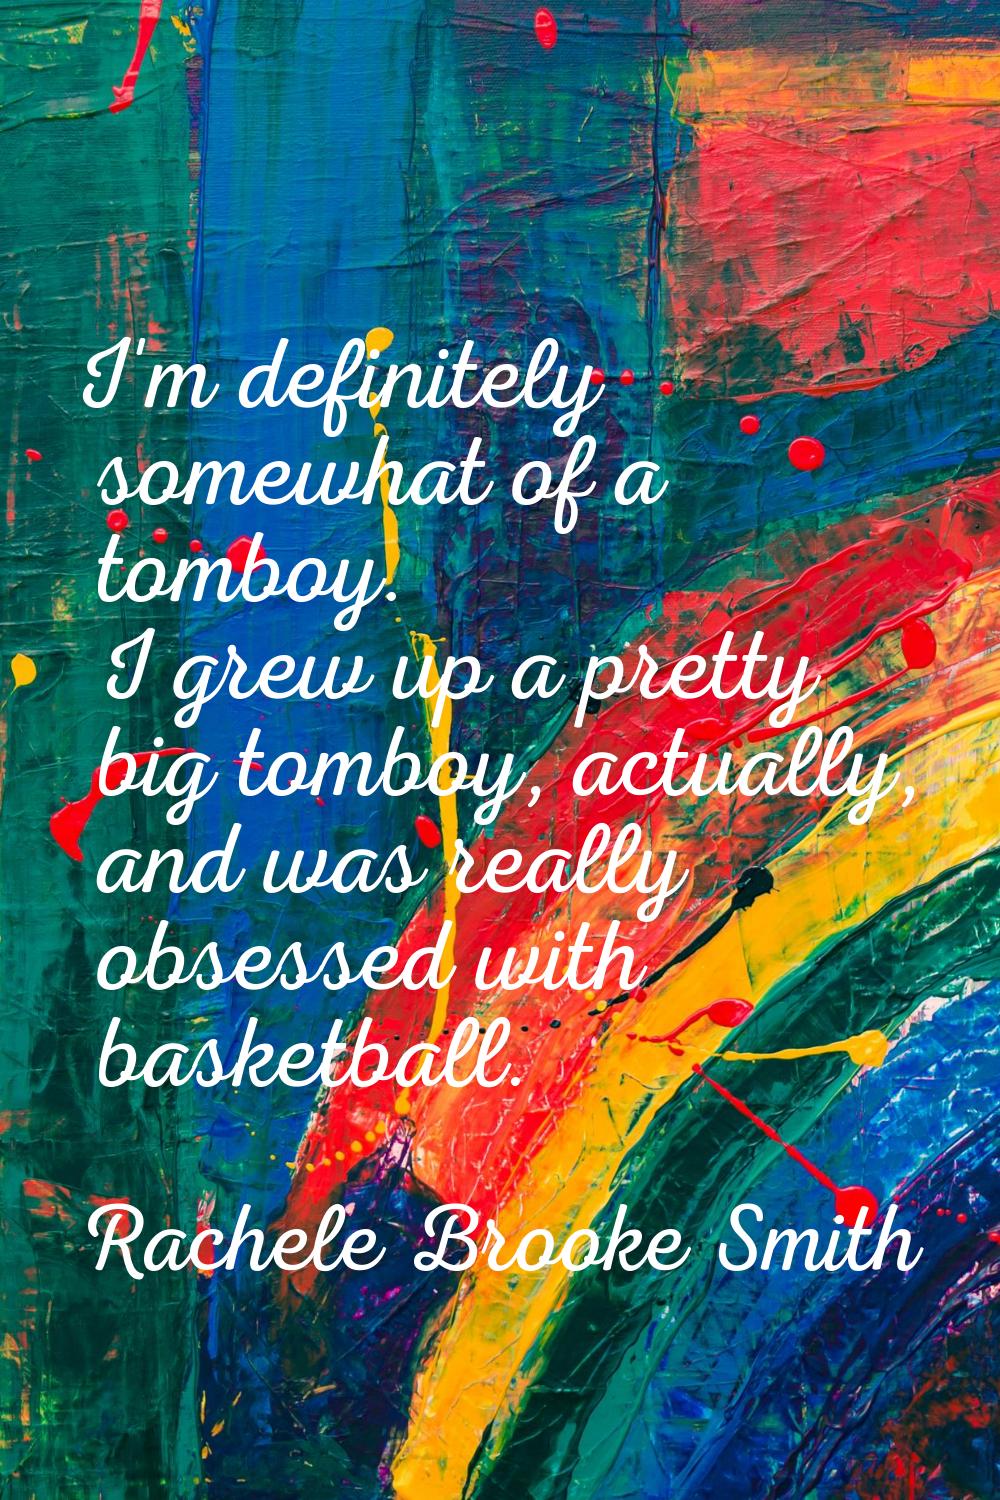 I'm definitely somewhat of a tomboy. I grew up a pretty big tomboy, actually, and was really obsess